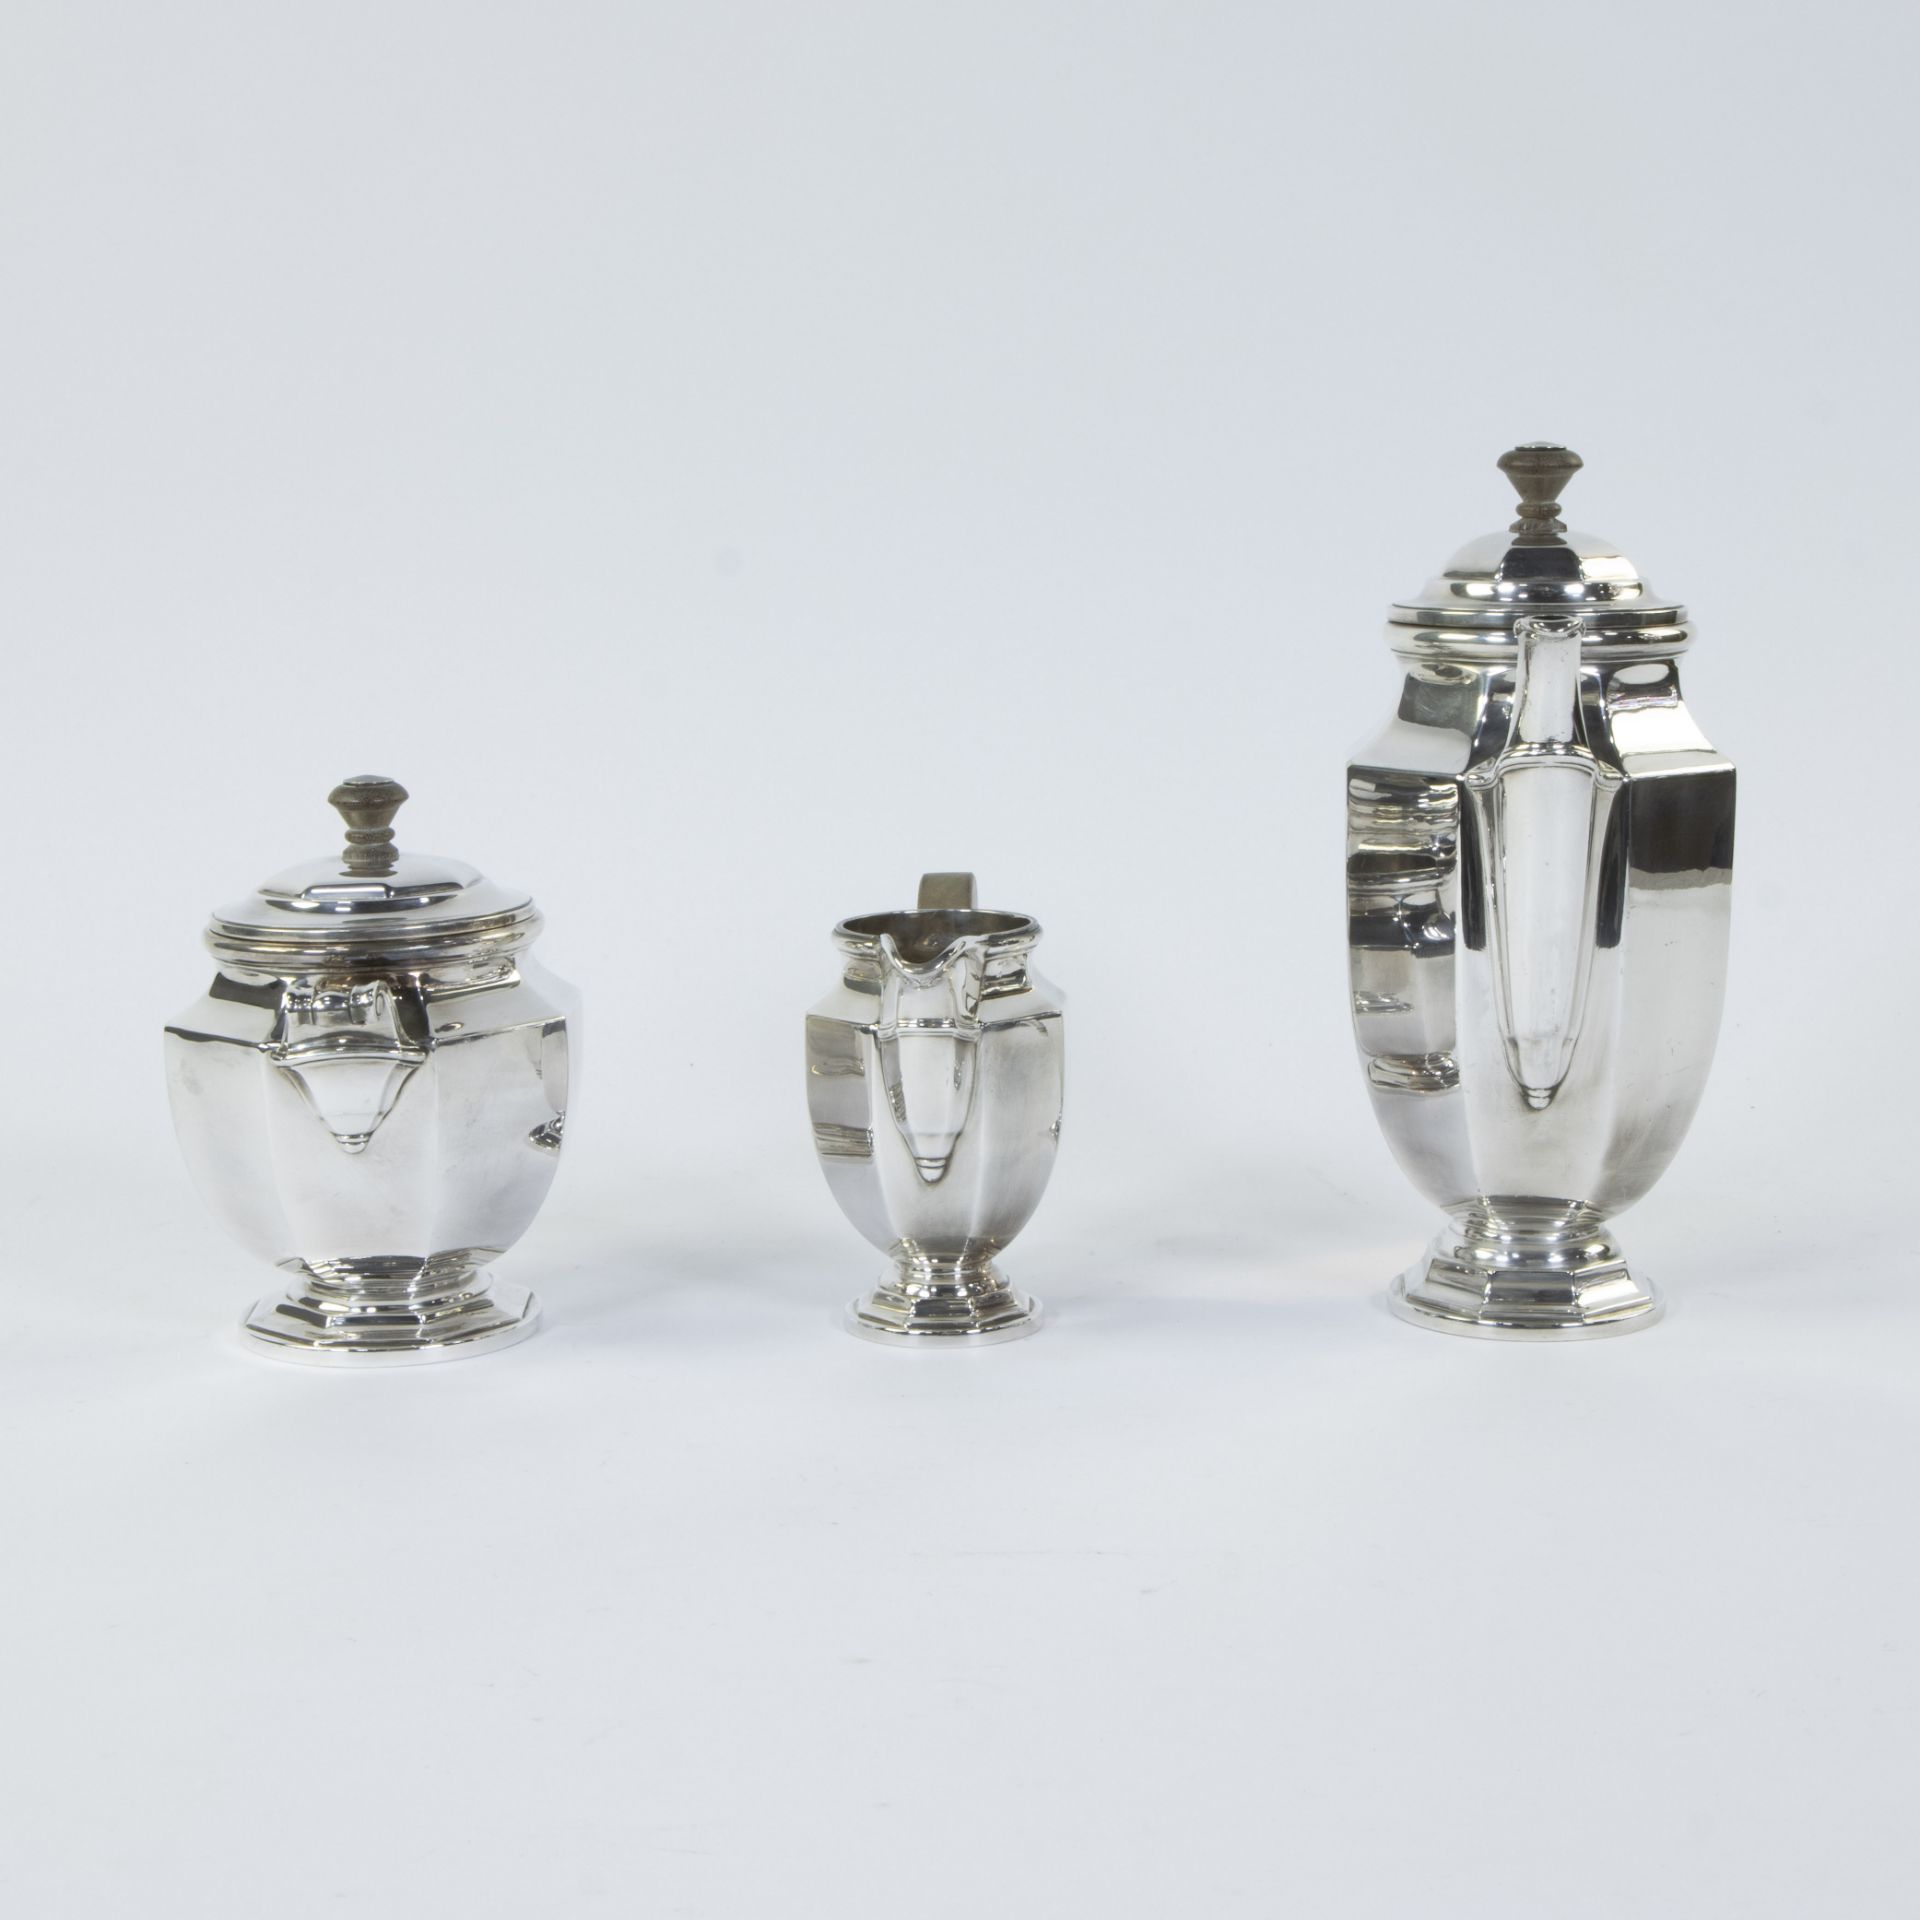 Christofle Art Deco silver-plated coffee service with wooden handles, markedt - Image 3 of 6